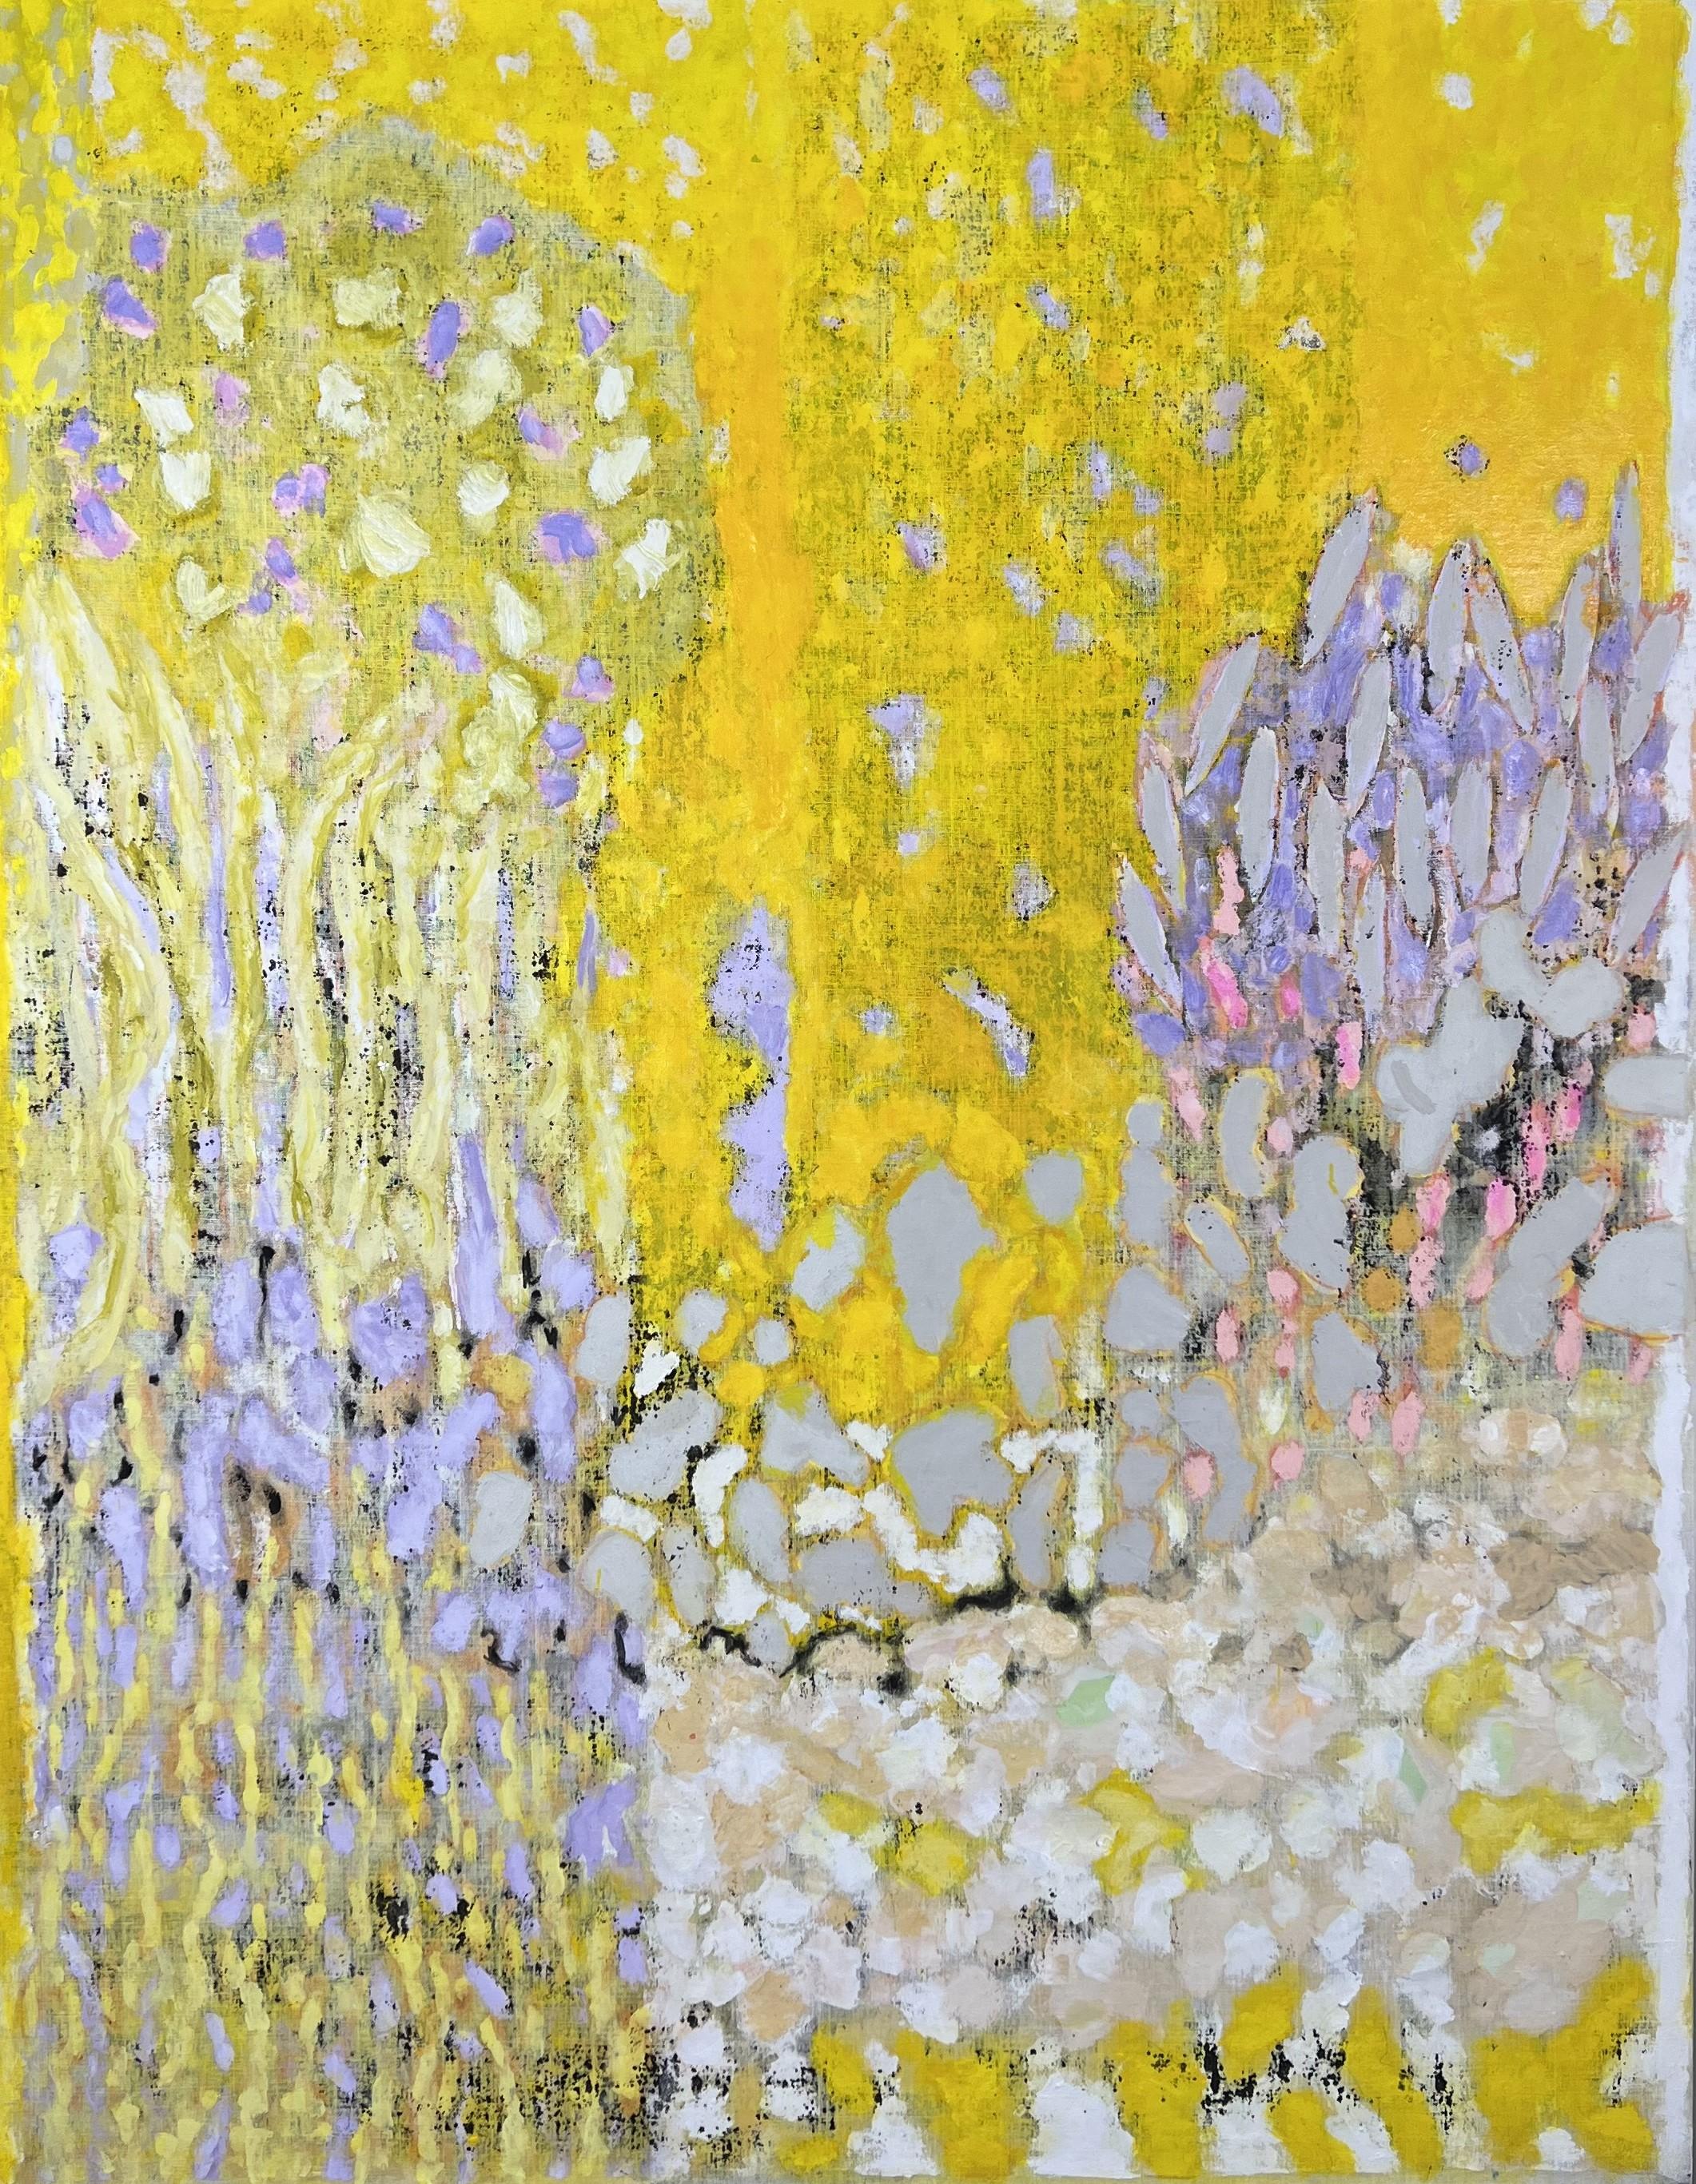 Marc Tanguy (born in 1959)
Marc Tanguy's Yellow Garden is a very luminous painting. To work his subject, he experiments with different materials, adapting to the result they impose. In this case, he began by painting the back of the canvas with a